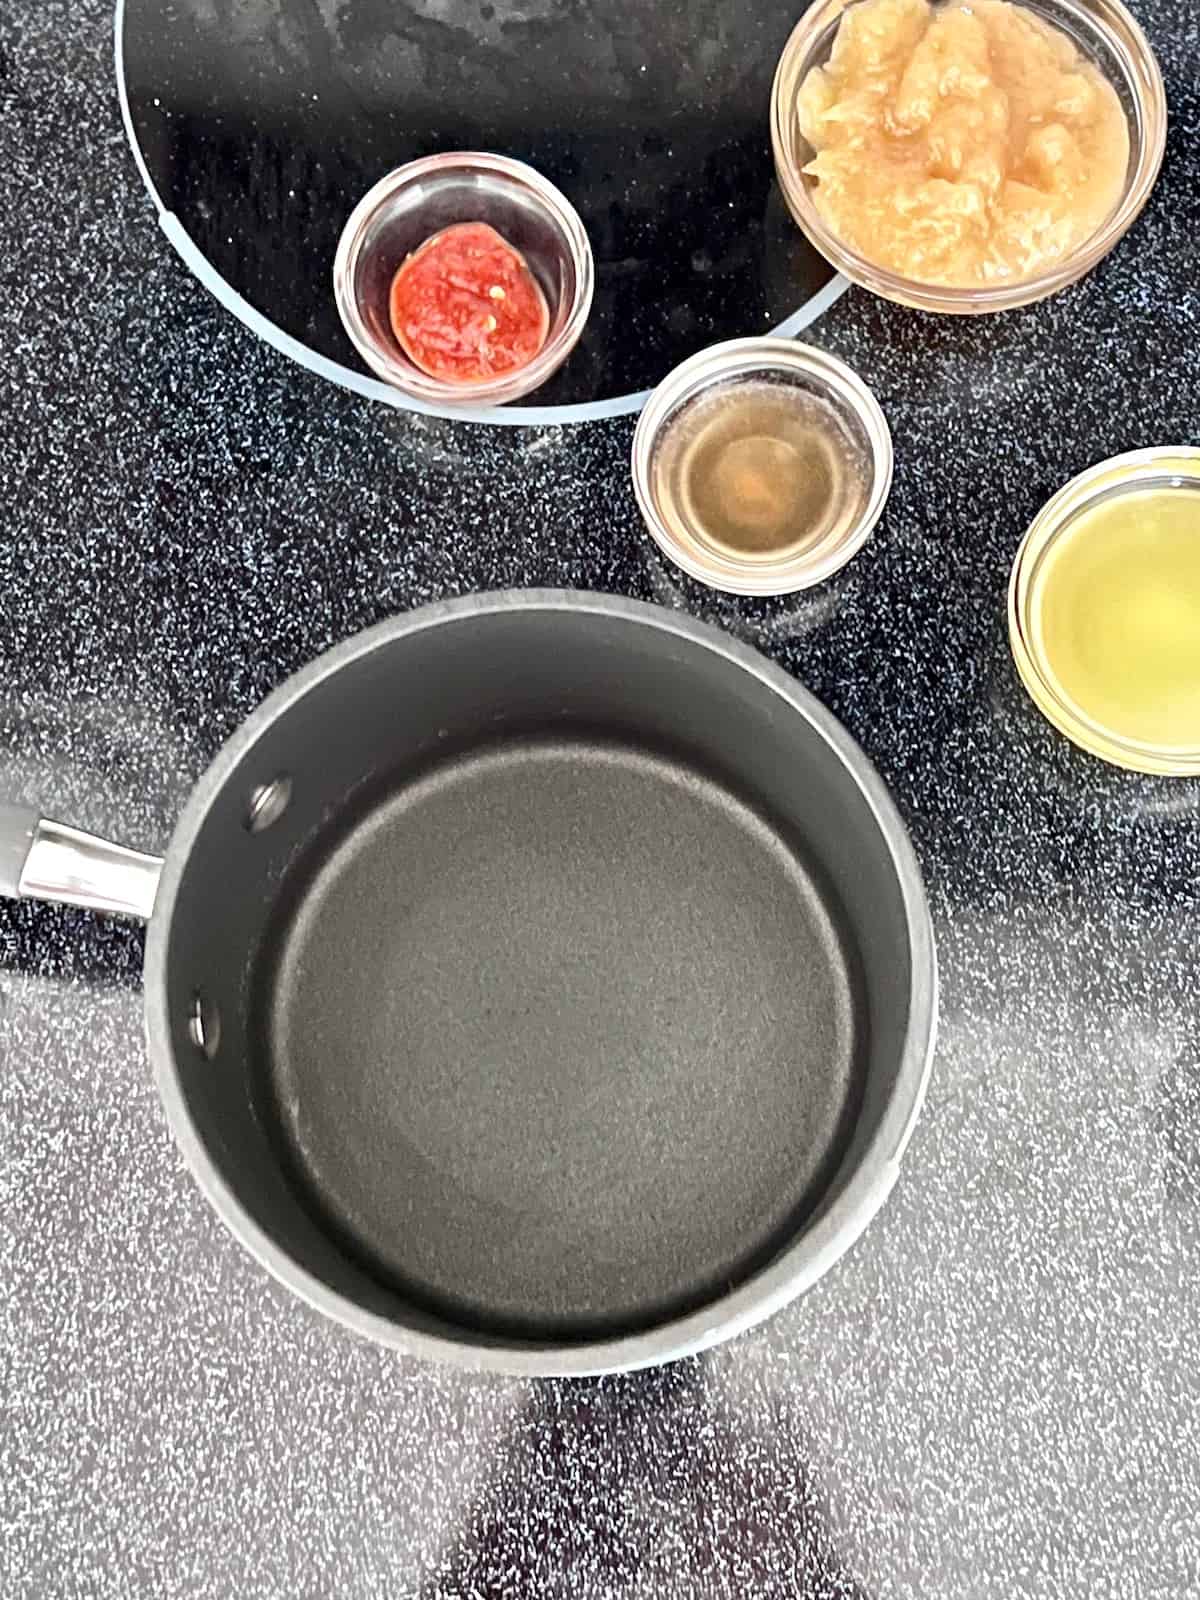 Overhead of saucepan and the ingredients.